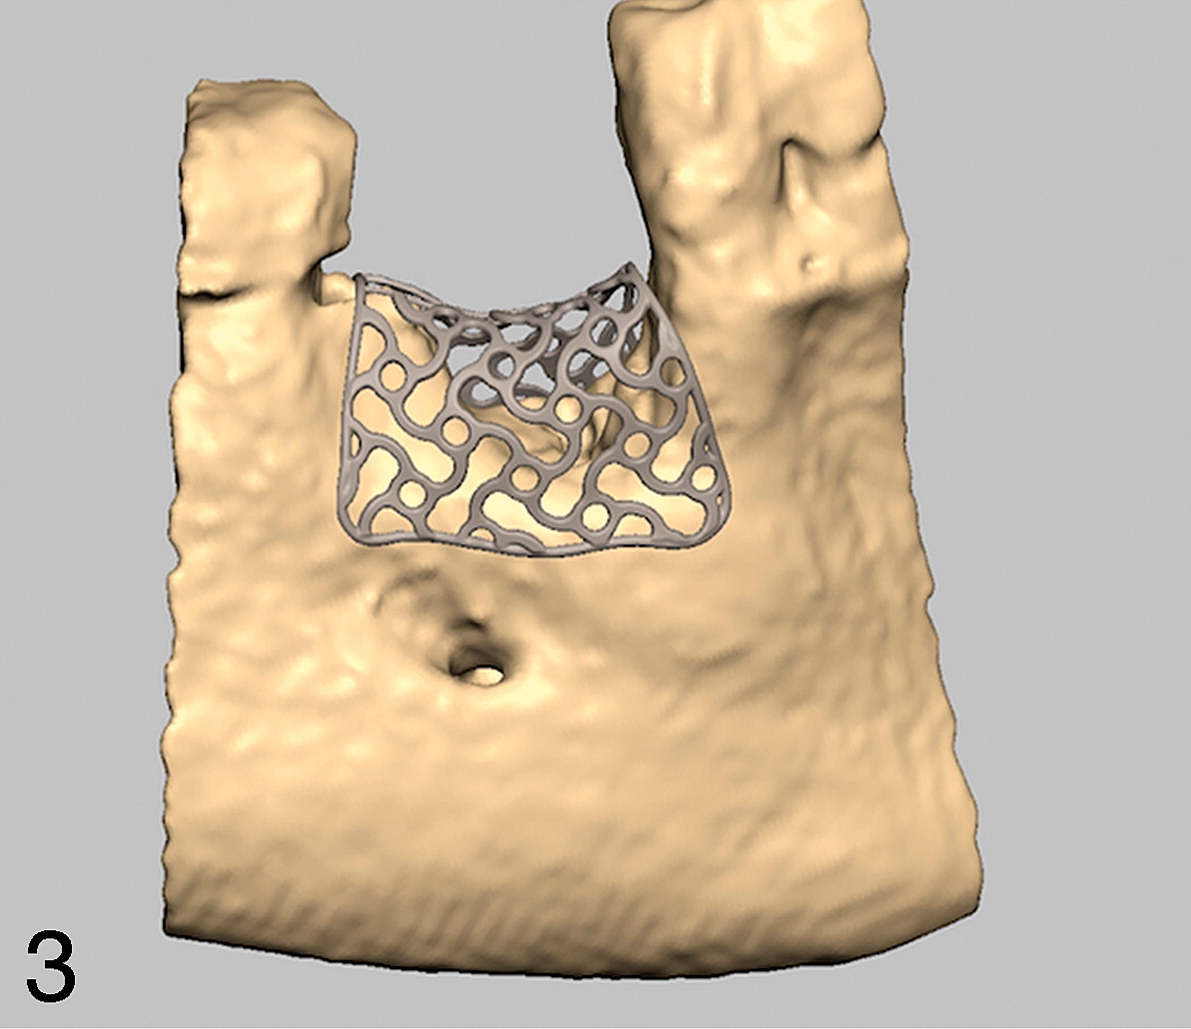 Extraction of the three-dimensional surface data from DICOM files reveals the definition of augmentation volume according to prosthetic backward planning. The inner contour of the lattice structure represents the desired augmentation volume.